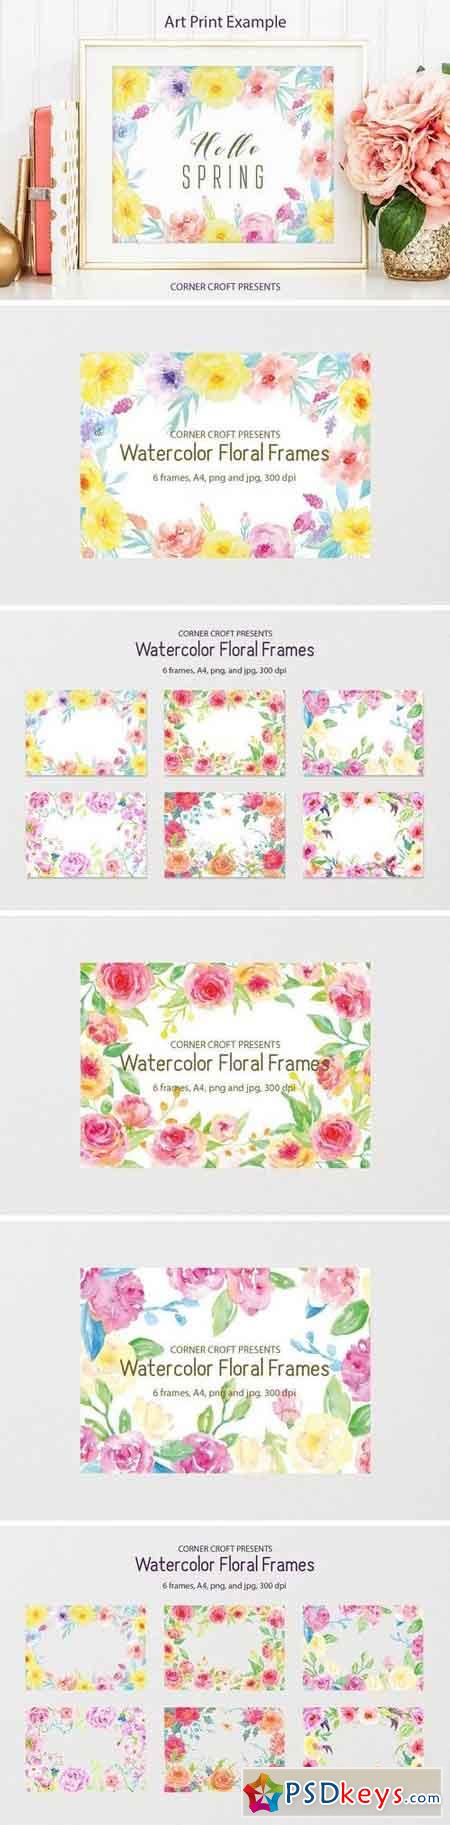 Watercolor floral frame yellow and pink